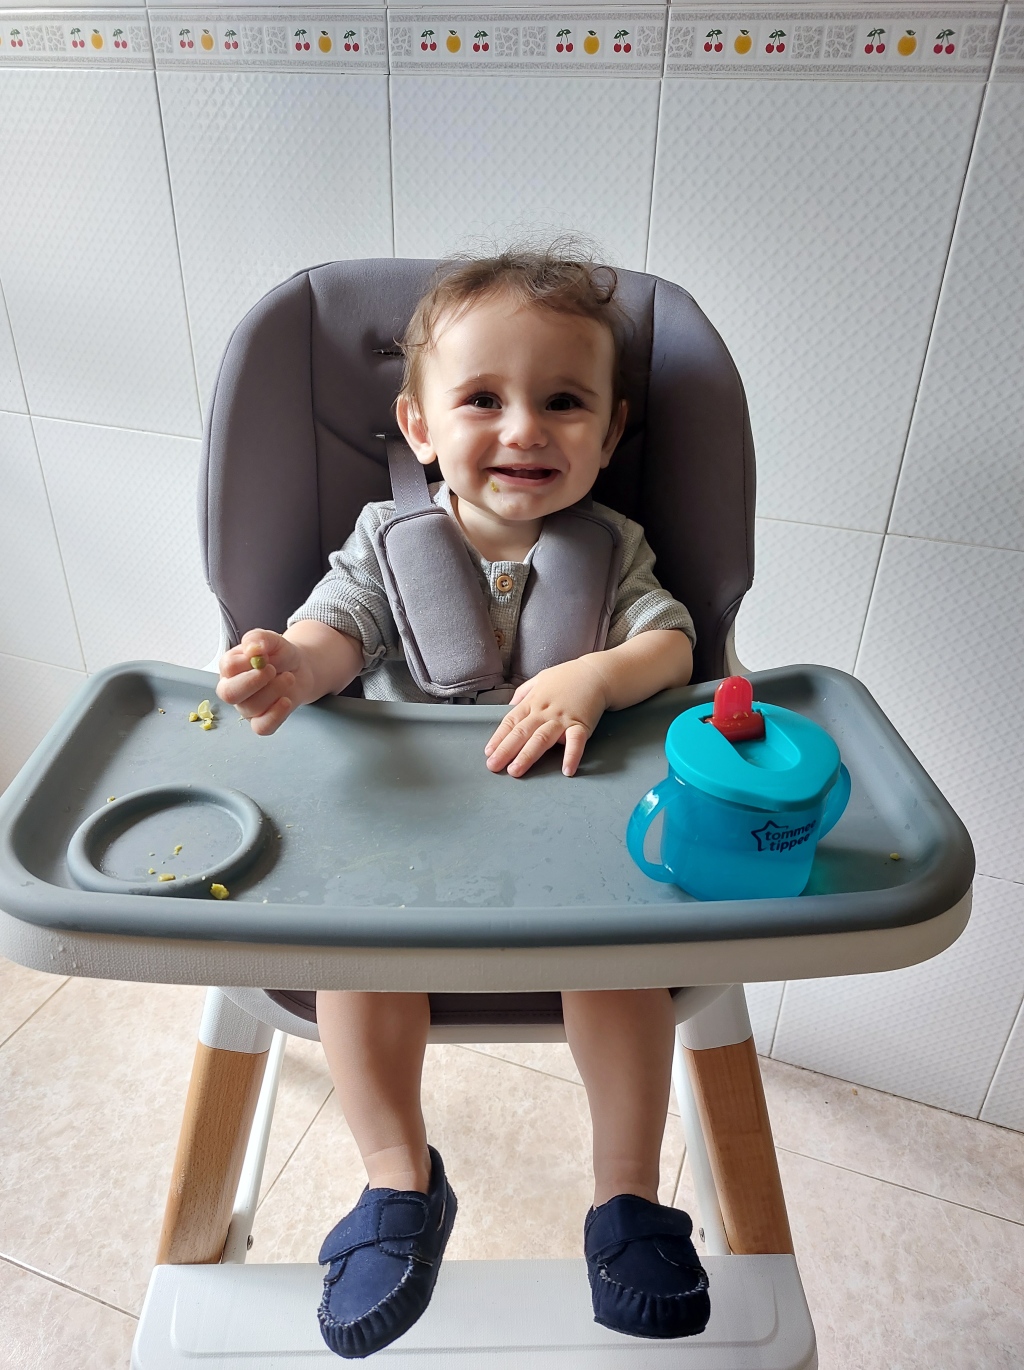 OLMITOS multifunctional high chair Review